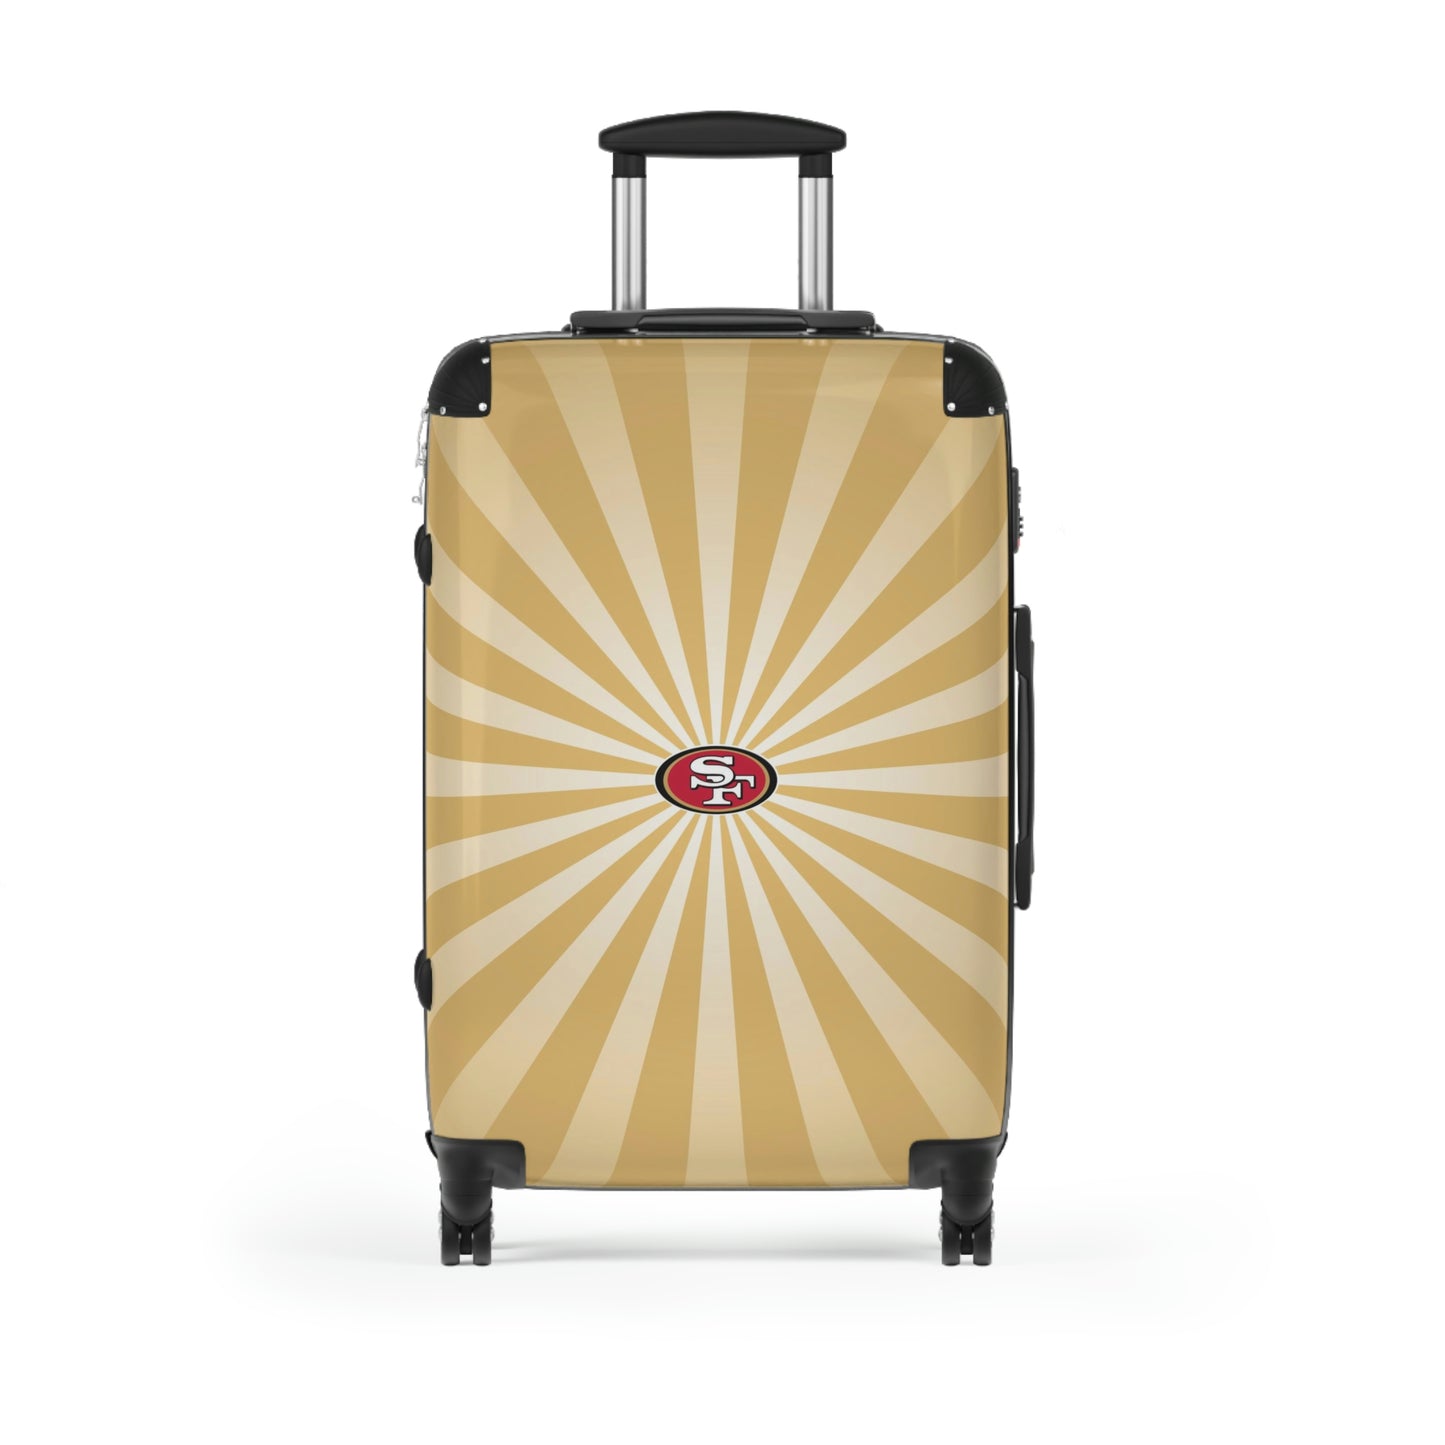 Geotrott San Francisco 49ers National Football League NFL Team Logo Cabin Suitcase Rolling Luggage Checking Bag